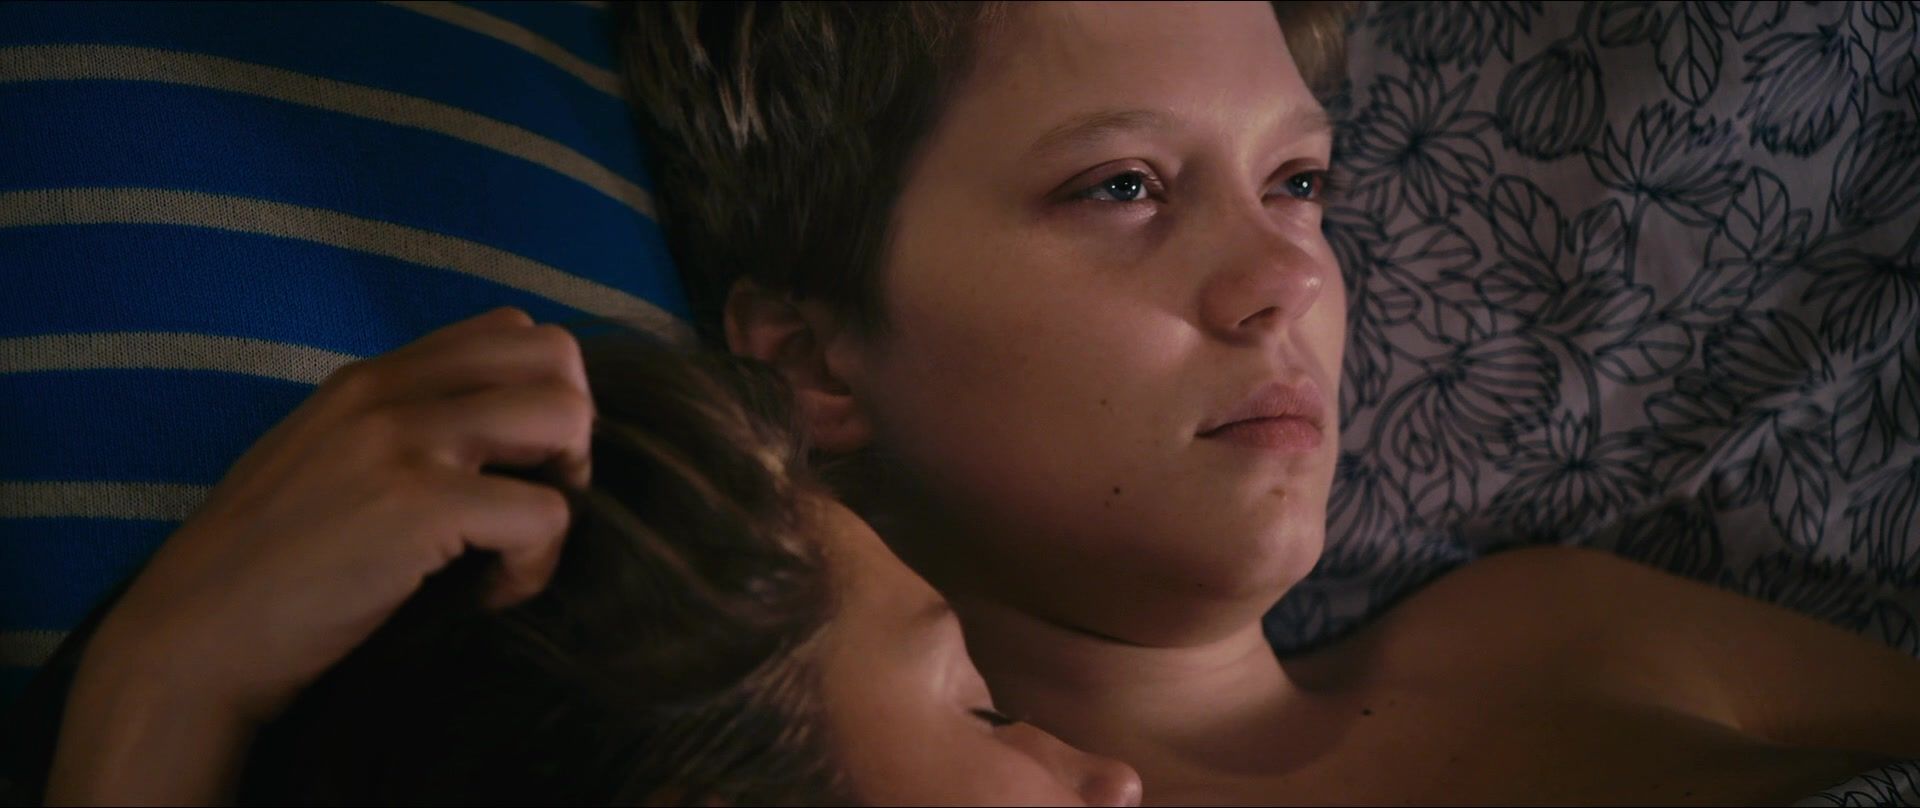 Thisav Best lesbian scene in movies | Adele Exarchopoulos nude & Léa Seydoux naked | The film "Blue Is The Warmest Color" (2013) JAVout